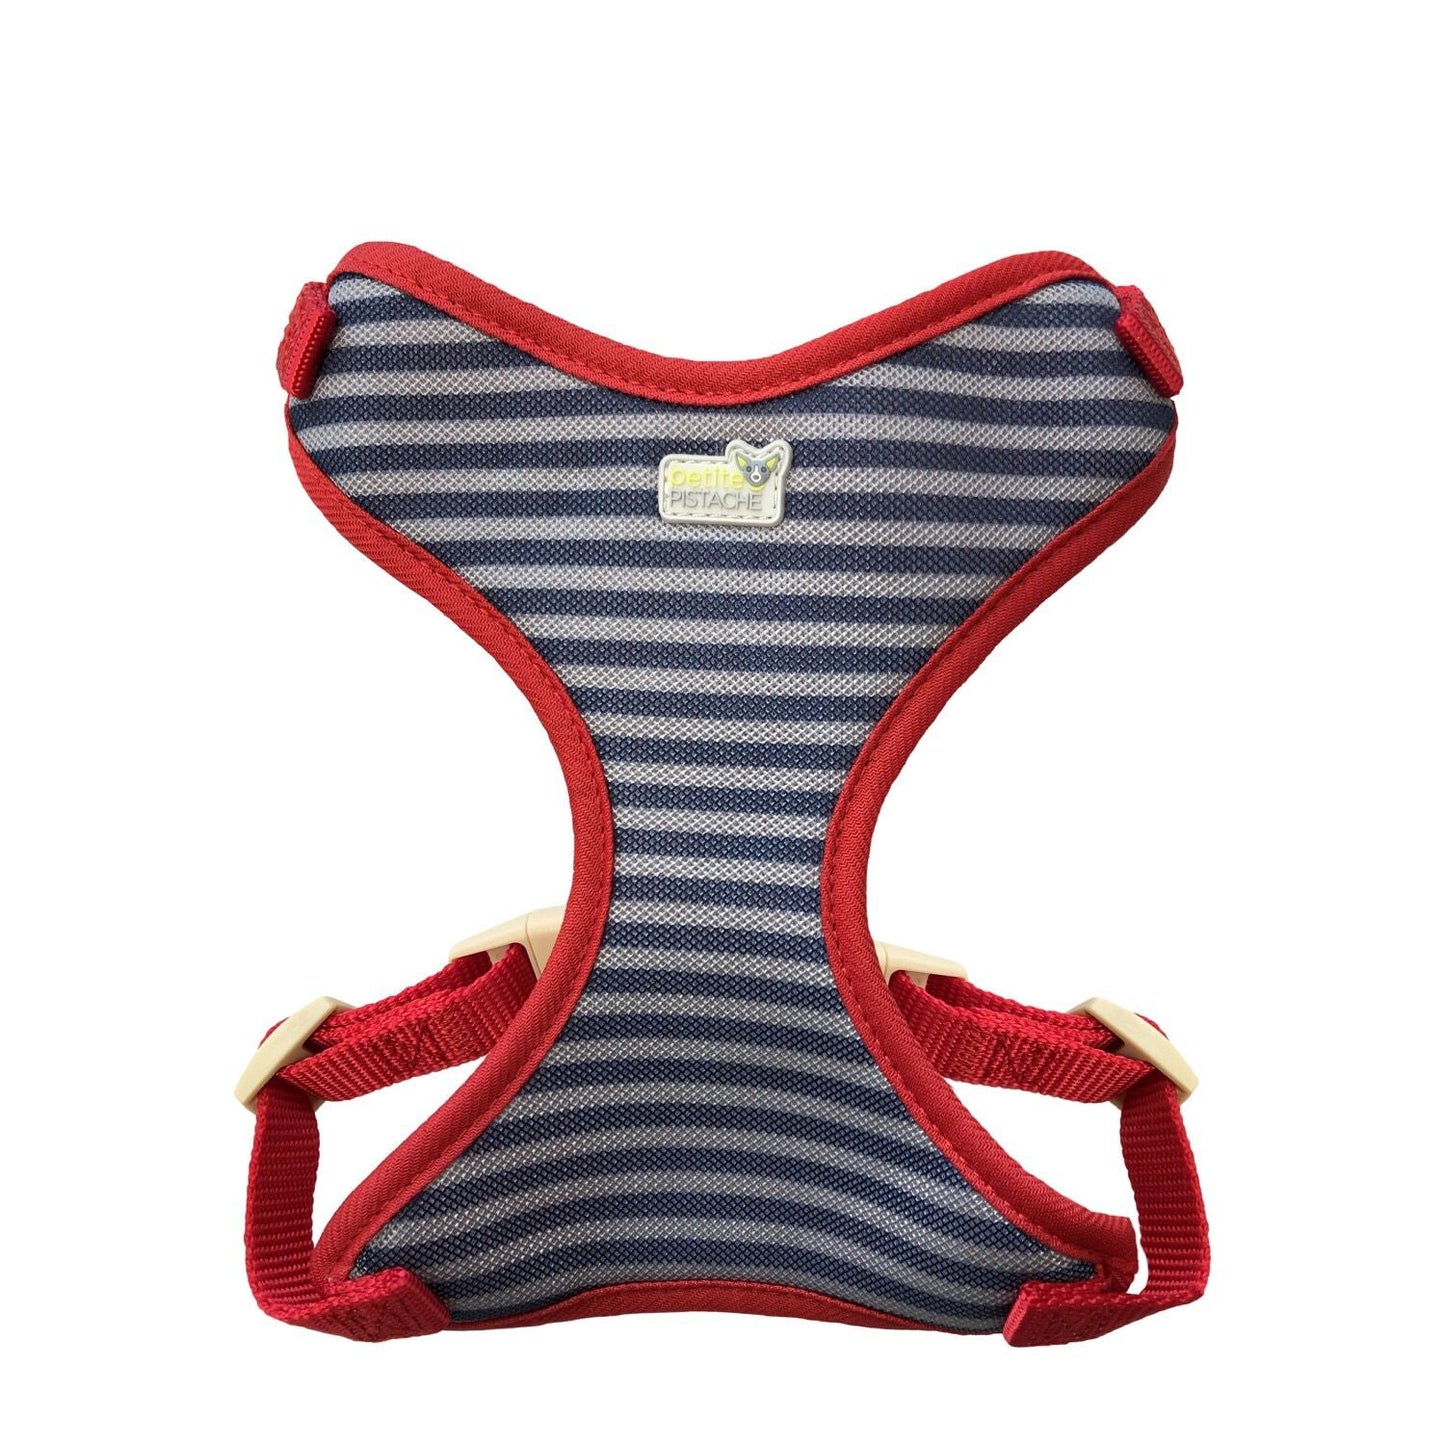 Petite Pistache Adjustable Harness for Very Small Dogs, Stripes